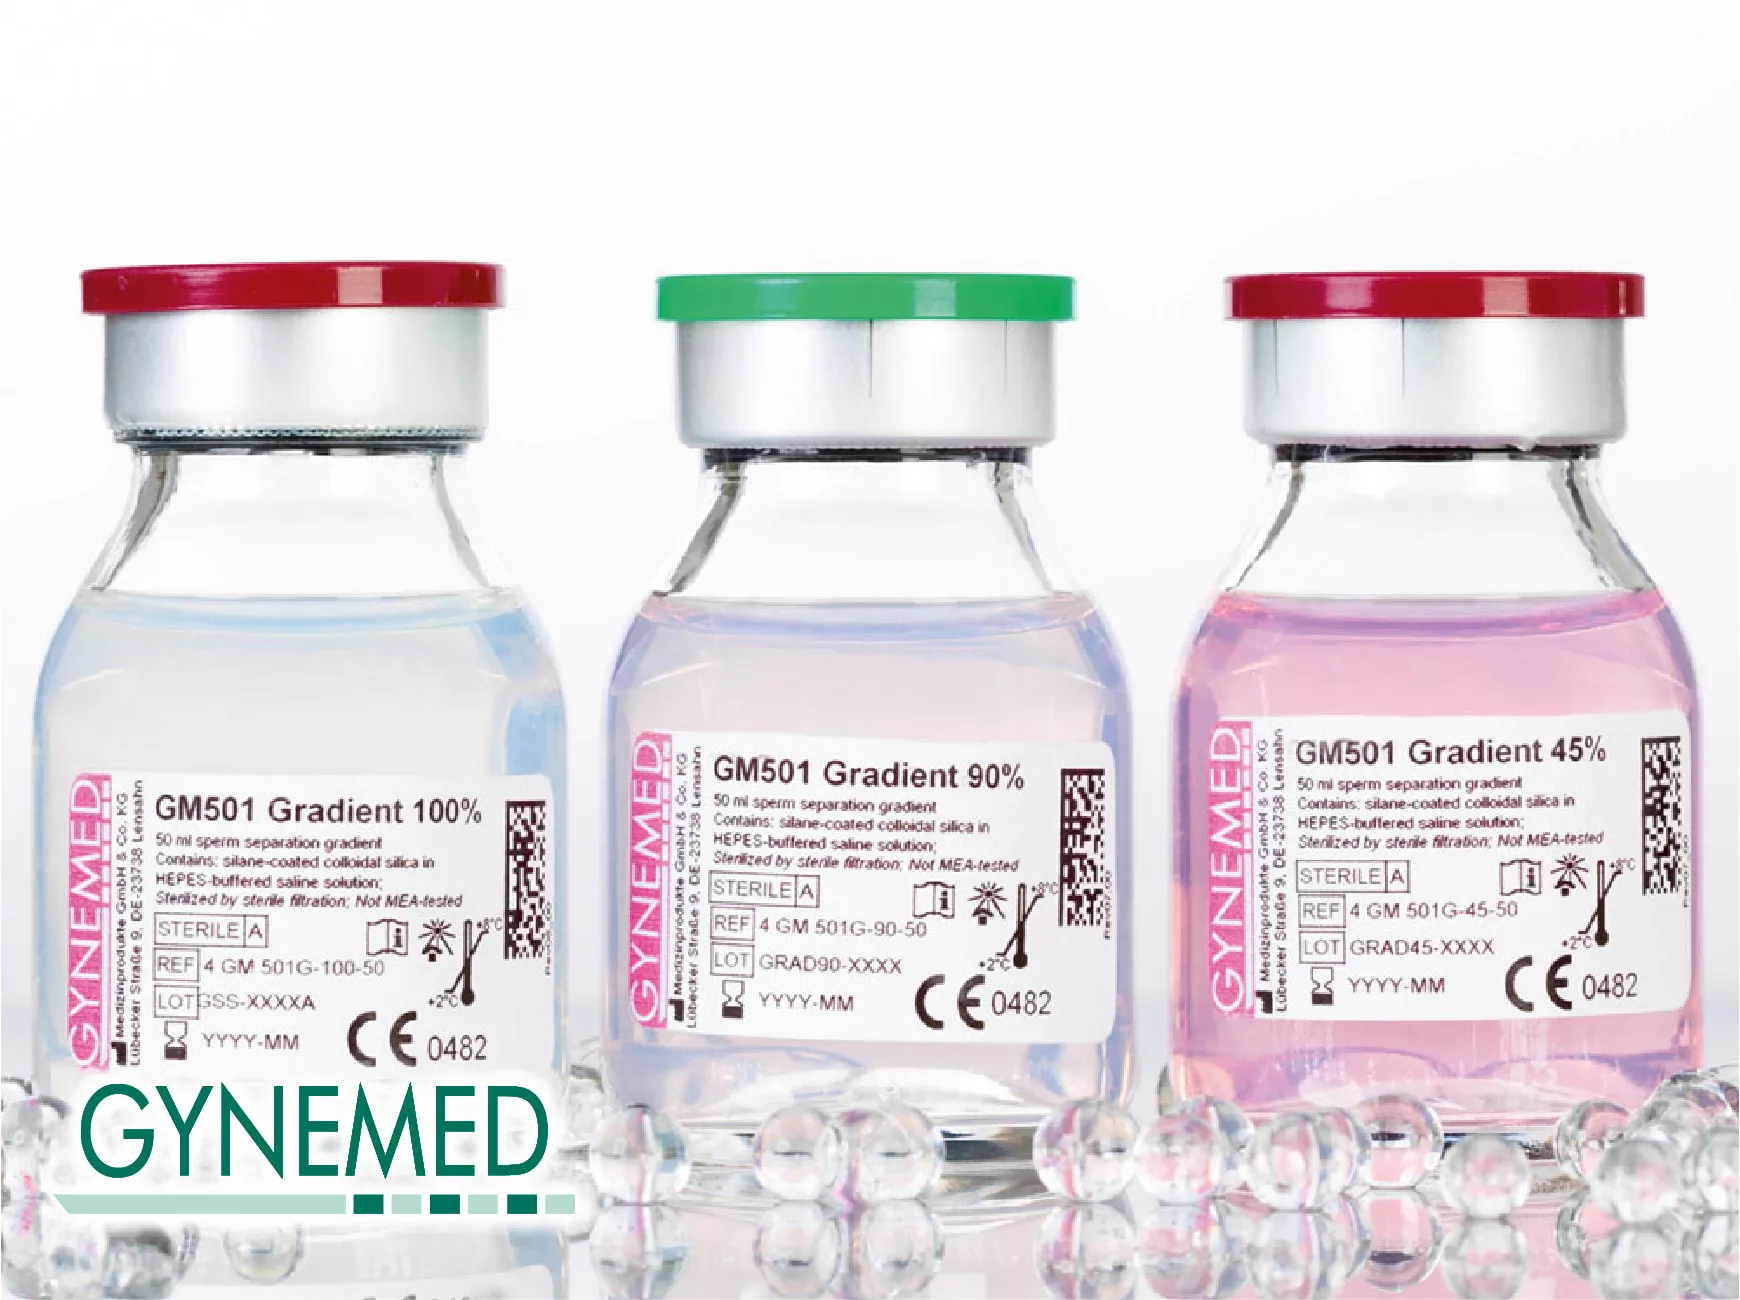 Gynemed GM501 Gradient 45% and 90%